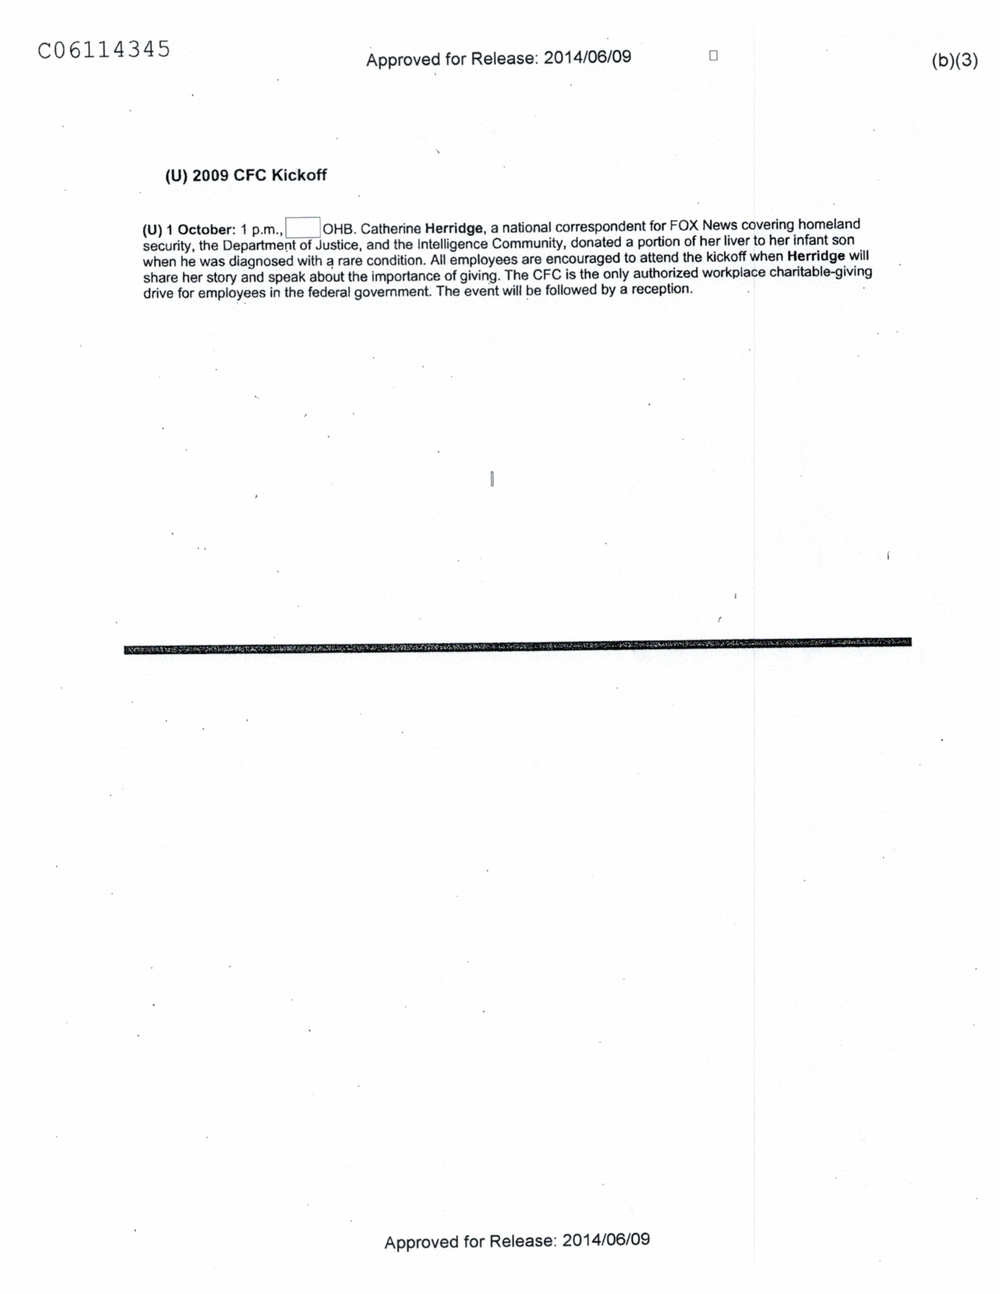 Page 573 from Email Correspondence Between Reporters and CIA Flacks